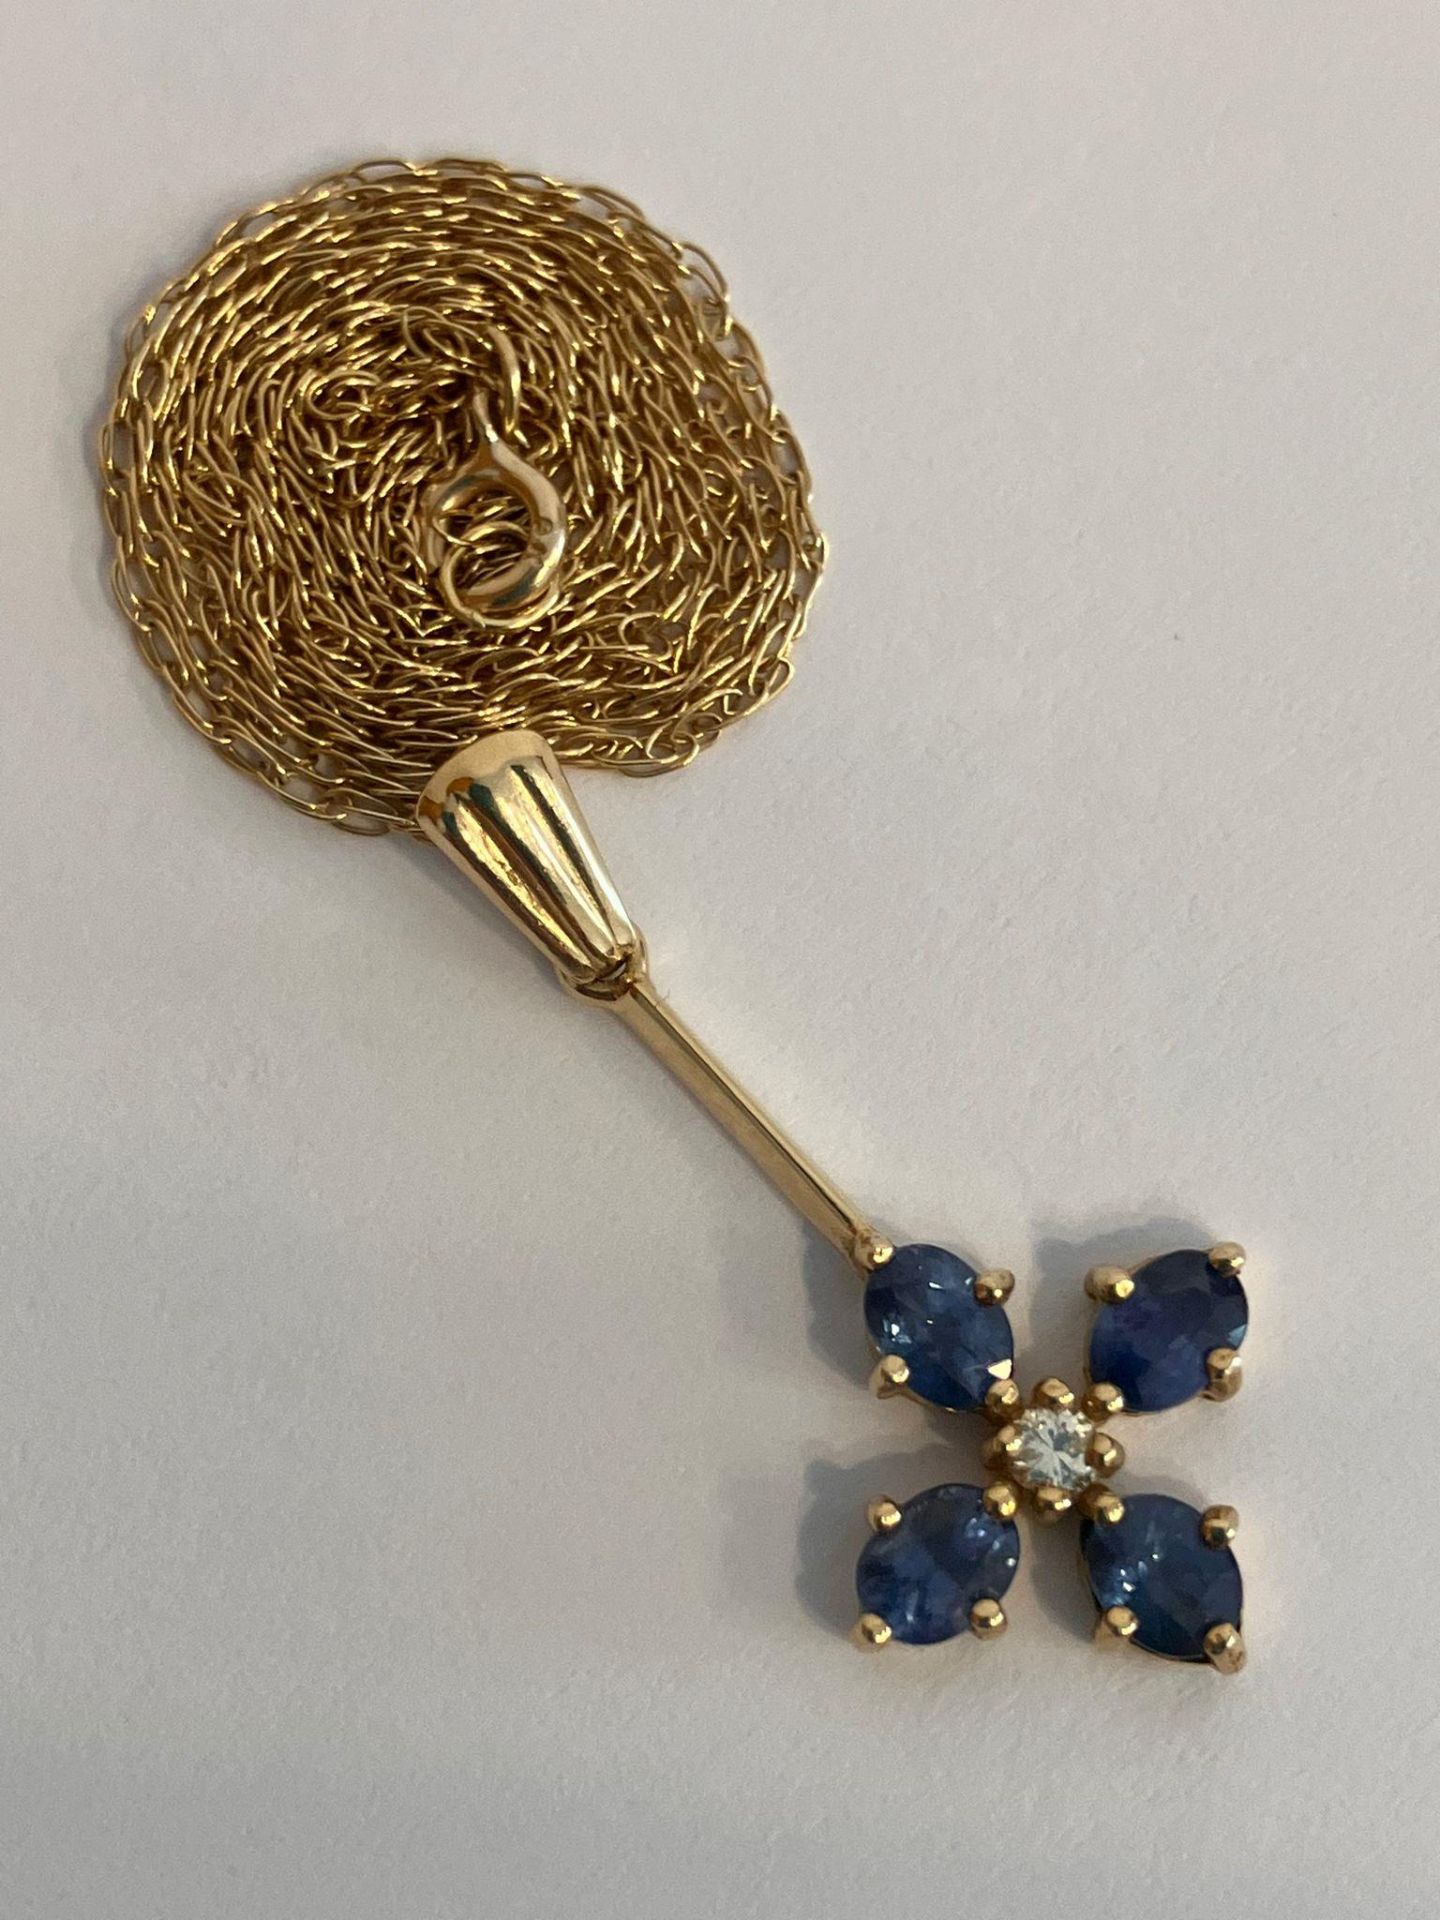 9 carat GOLD DIAMOND and SAPPHIRE PENDANT with 9 carat GOLD Chain. Pendant 2.75 Grams. Gold Chain 46 - Image 3 of 3